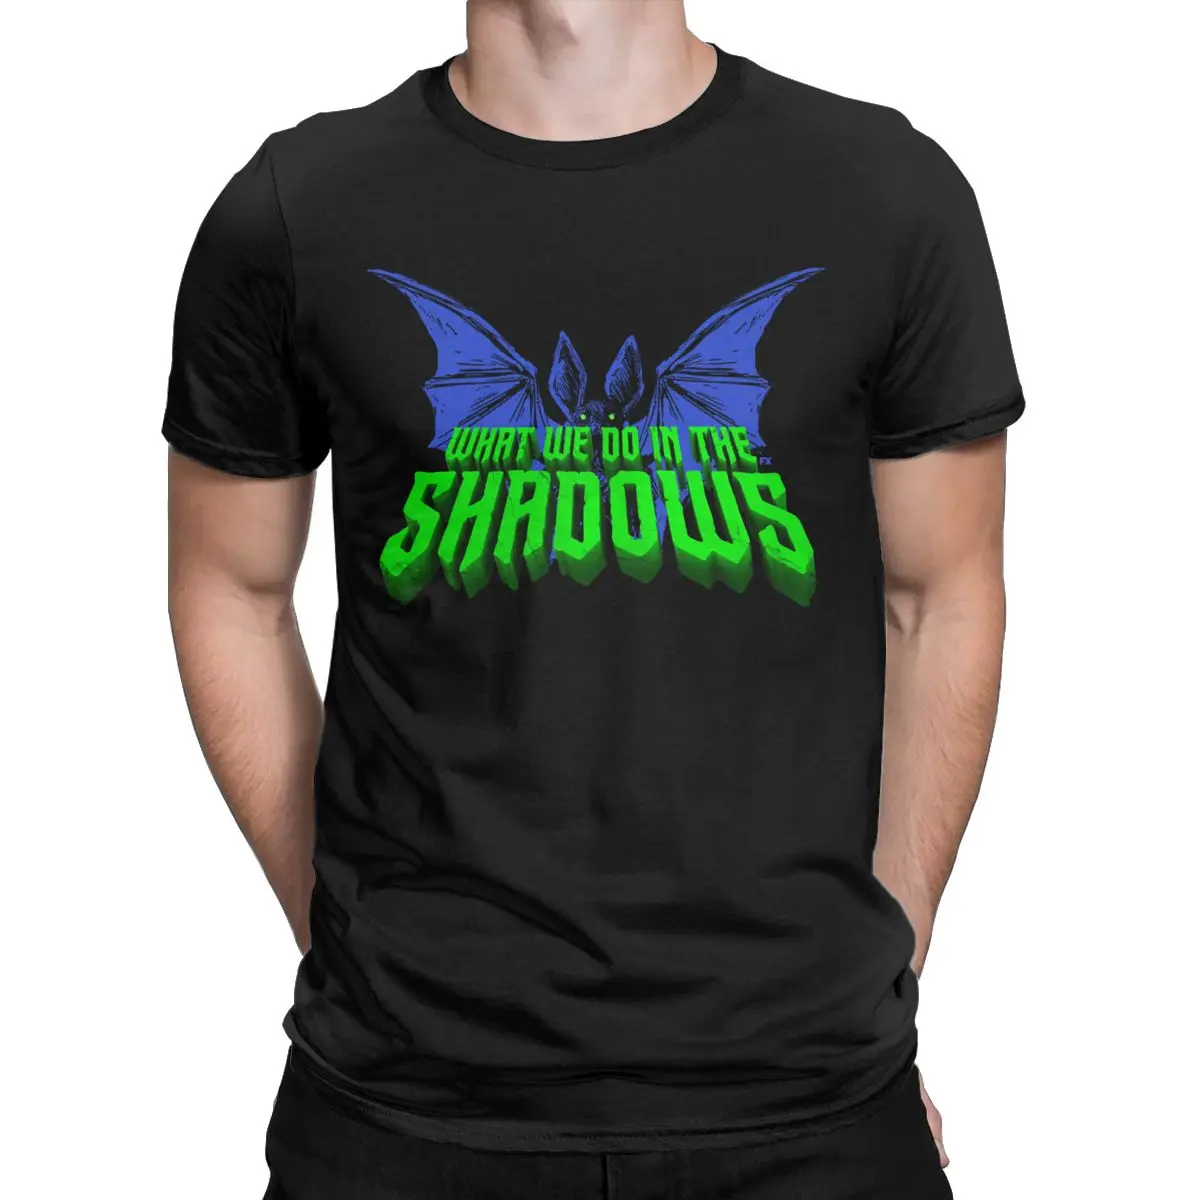 

What We Do In The Shadows Bat Logo t shirt for men Pure Cotton Funny T-Shirt Round Collar Tees Short Sleeve Tops 6XL